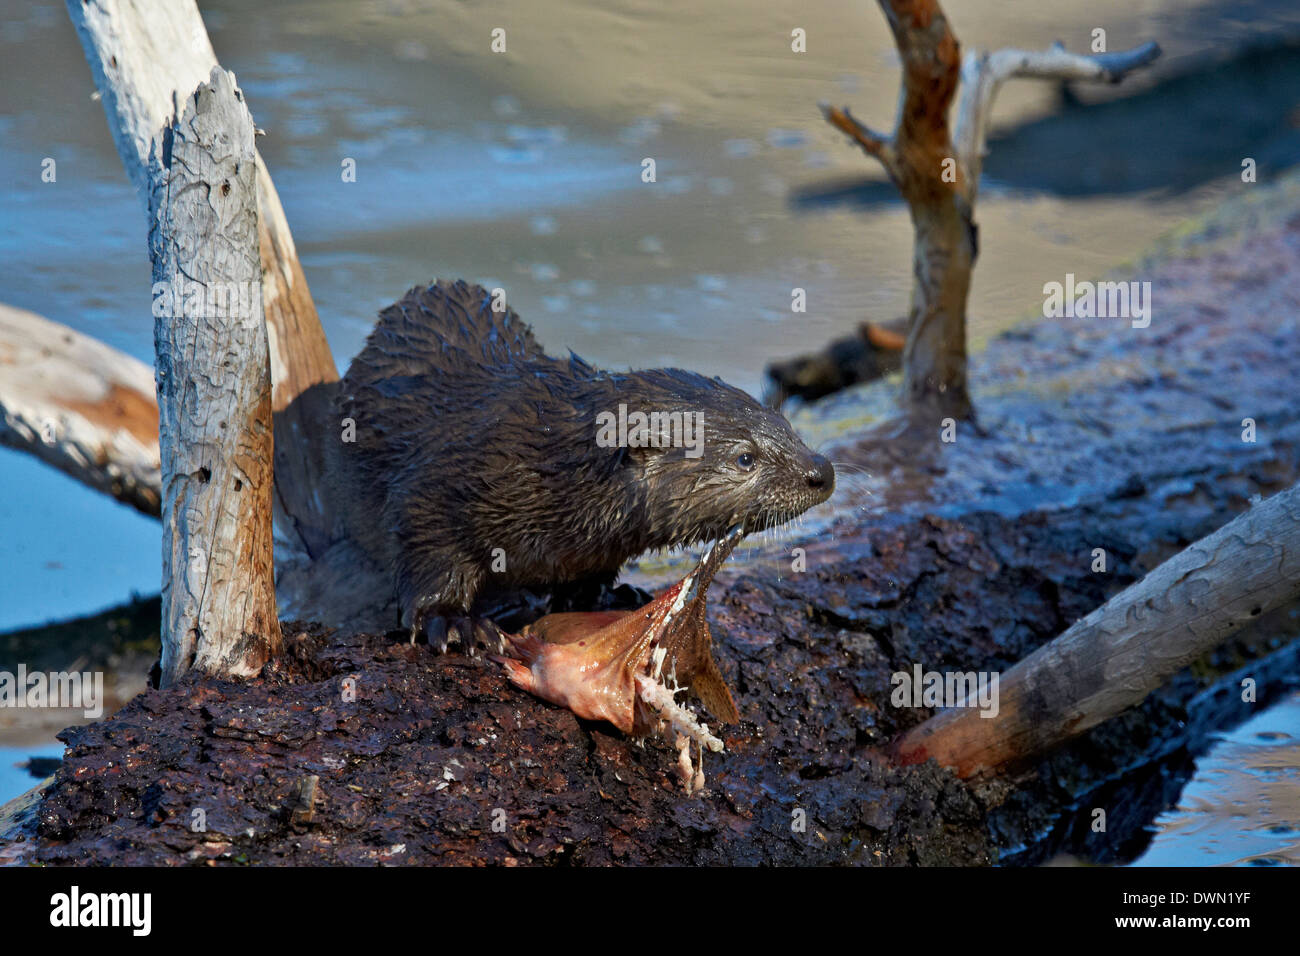 River Otter (Lutra canadensis) pup, Yellowstone National Park, Wyoming, United States of America, North America Stock Photo